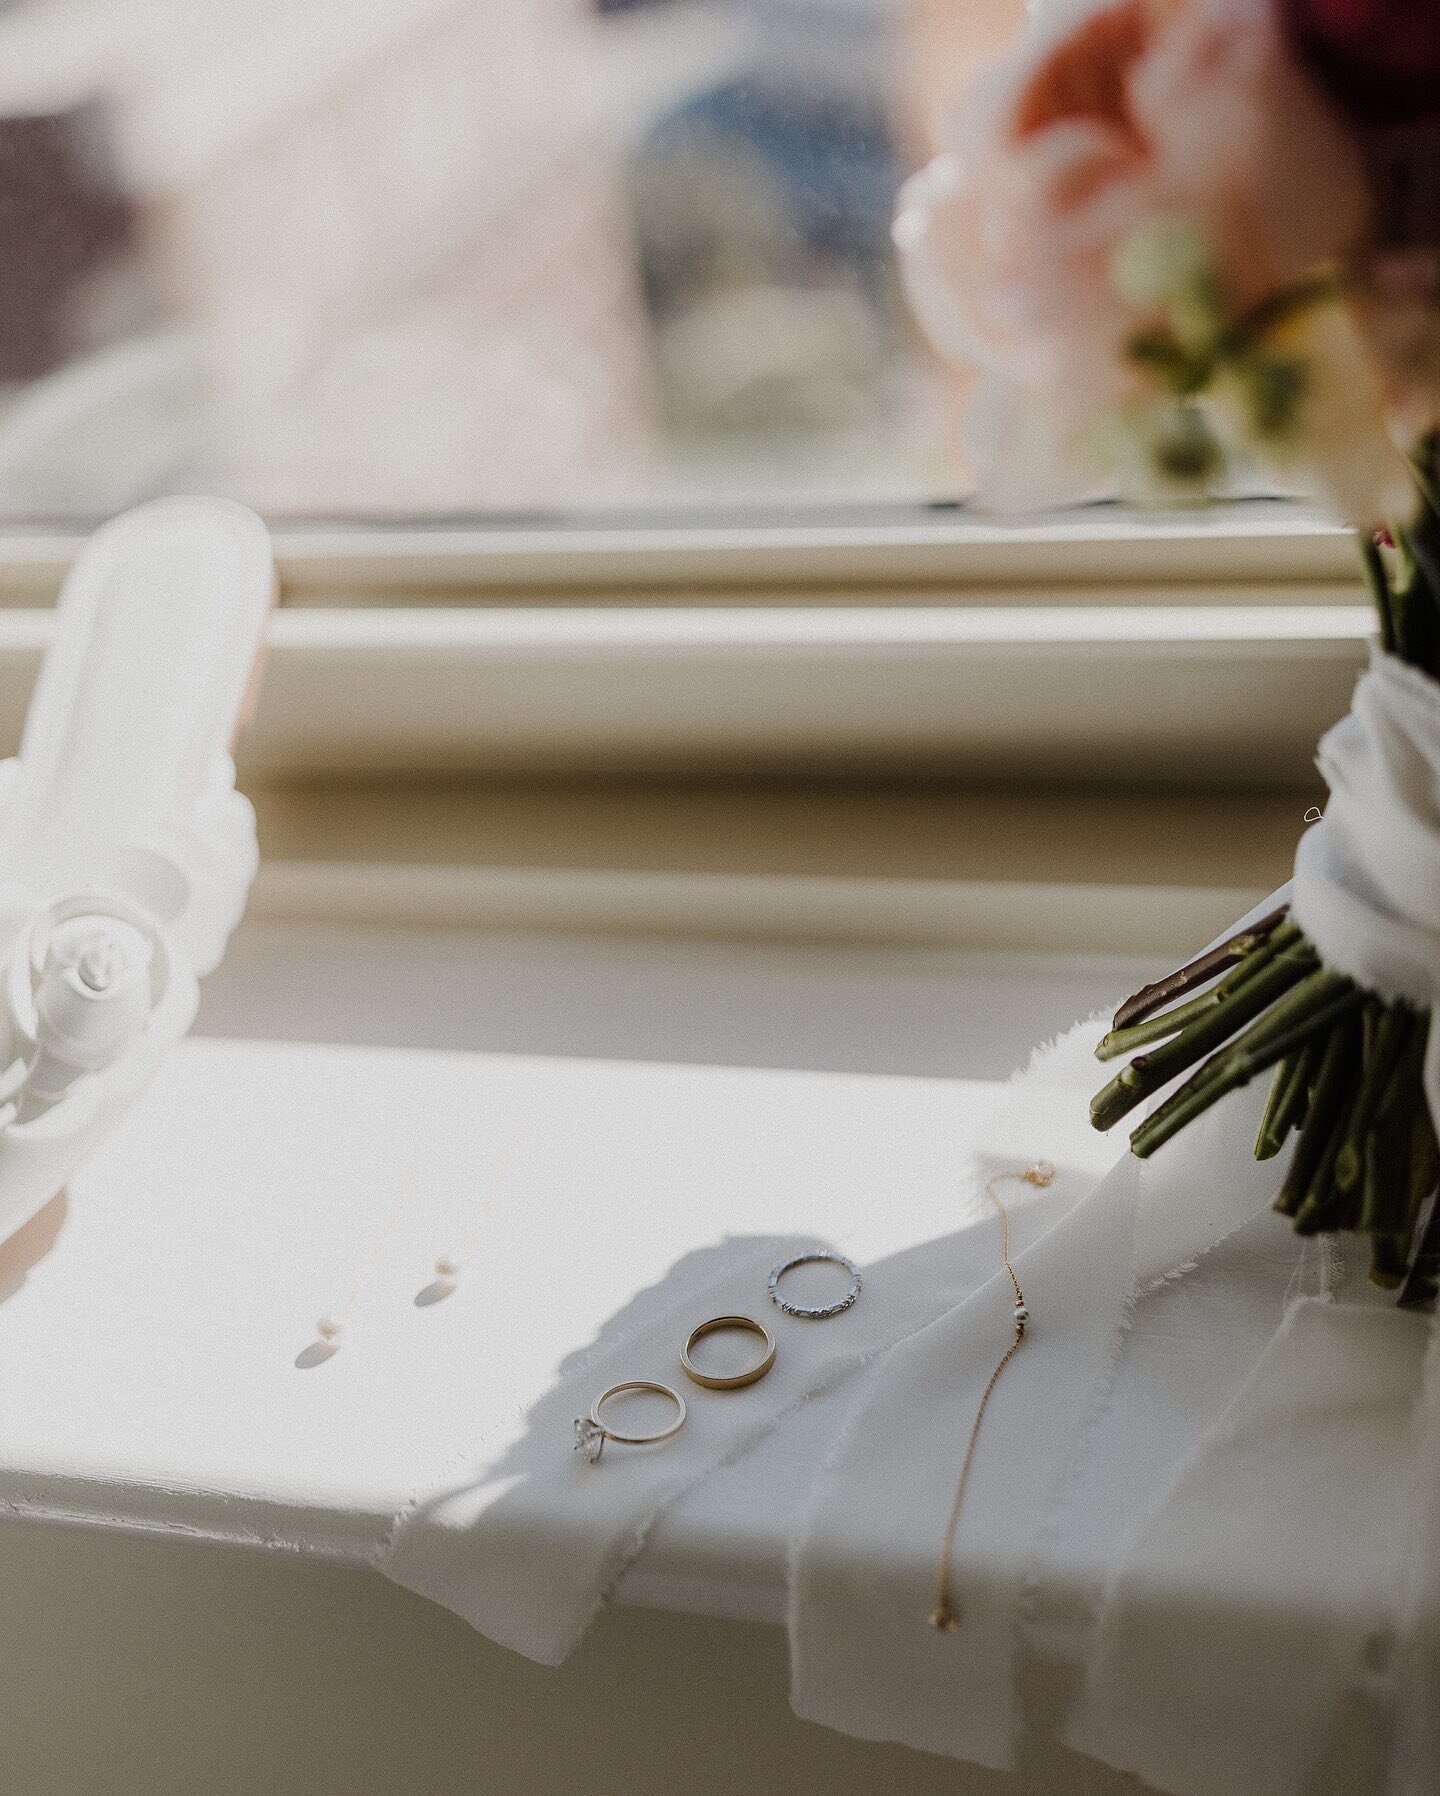 When @elisabethannephoto puts little details in the window and they have their own ✨moment✨

Thanks for letting me shoot pretty things with you always 🖤

#dfwweddings #dfwweddingphotographer #fortworthweddings #fortworthweddingphotographer #fortwort